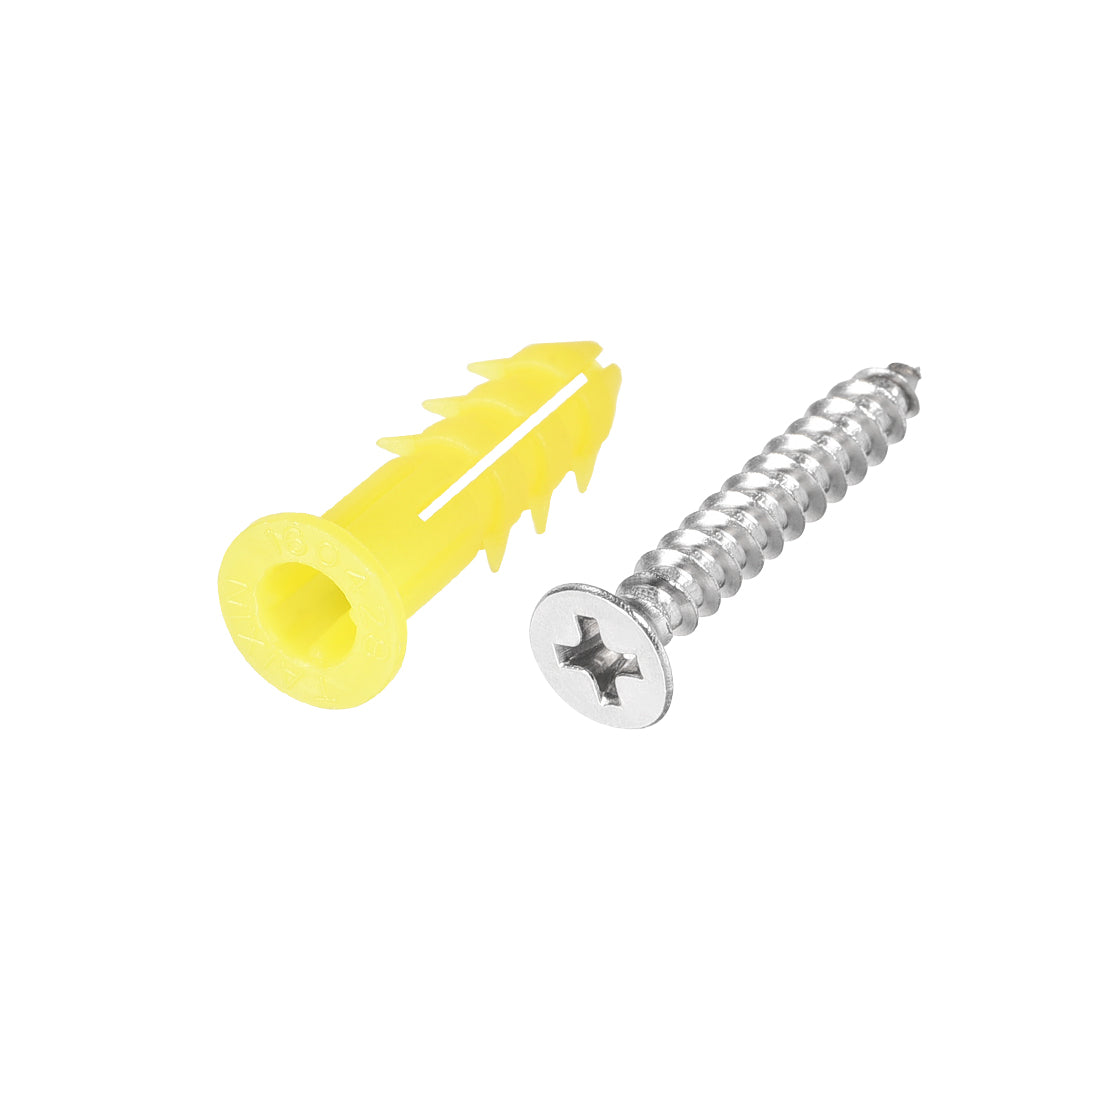 uxcell Uxcell 6x26mm Plastic Expansion Tube for Drywall with Screws, Yellow 25pcs